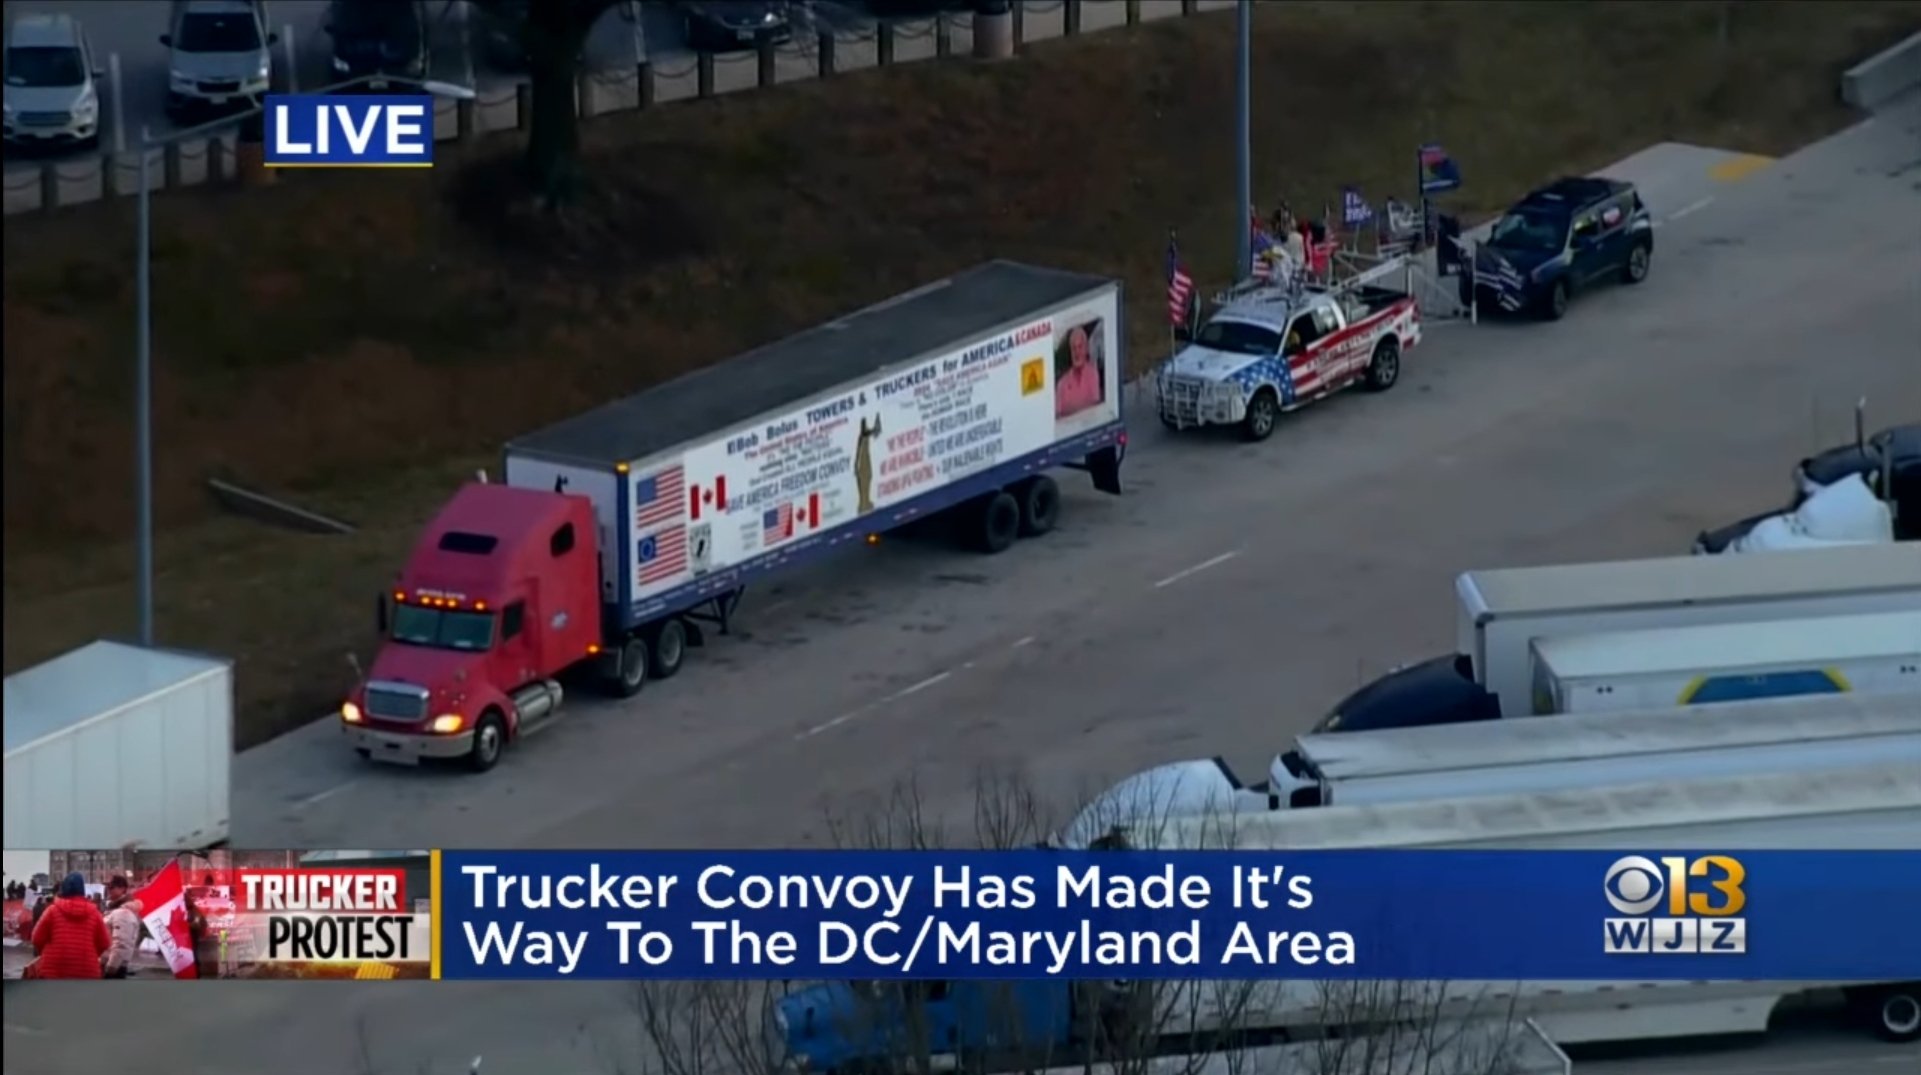  First Group of Truckers Reaches Biden’s Backyard As Massive People’s Convoy Begins its Journey to The Nation’s Capital (VIDEOS)